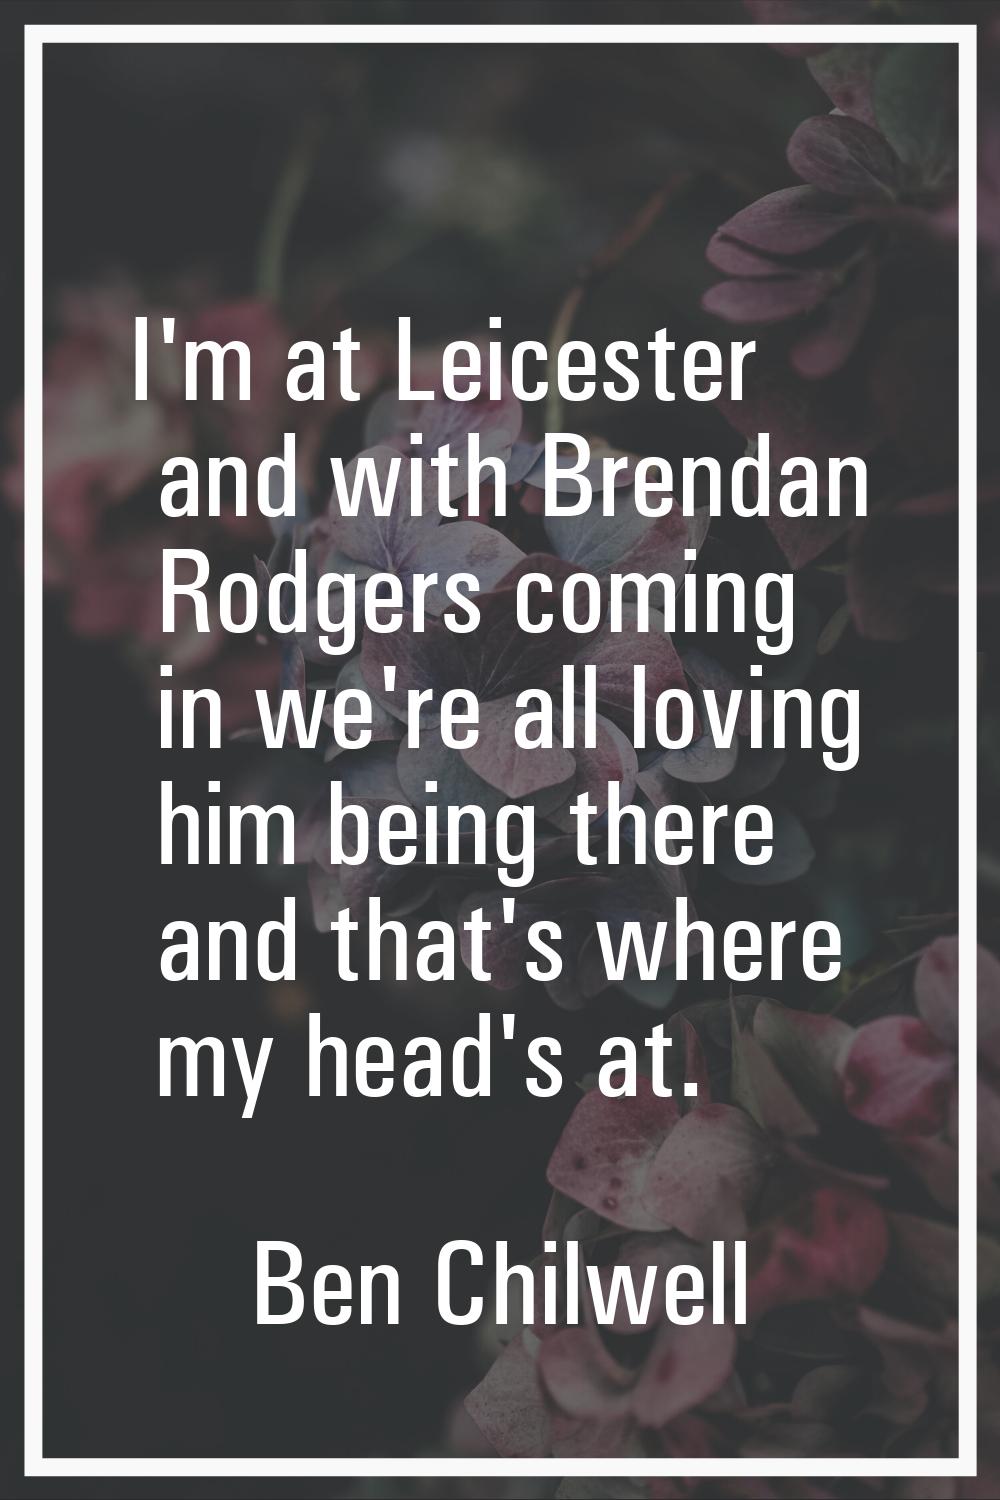 I'm at Leicester and with Brendan Rodgers coming in we're all loving him being there and that's whe